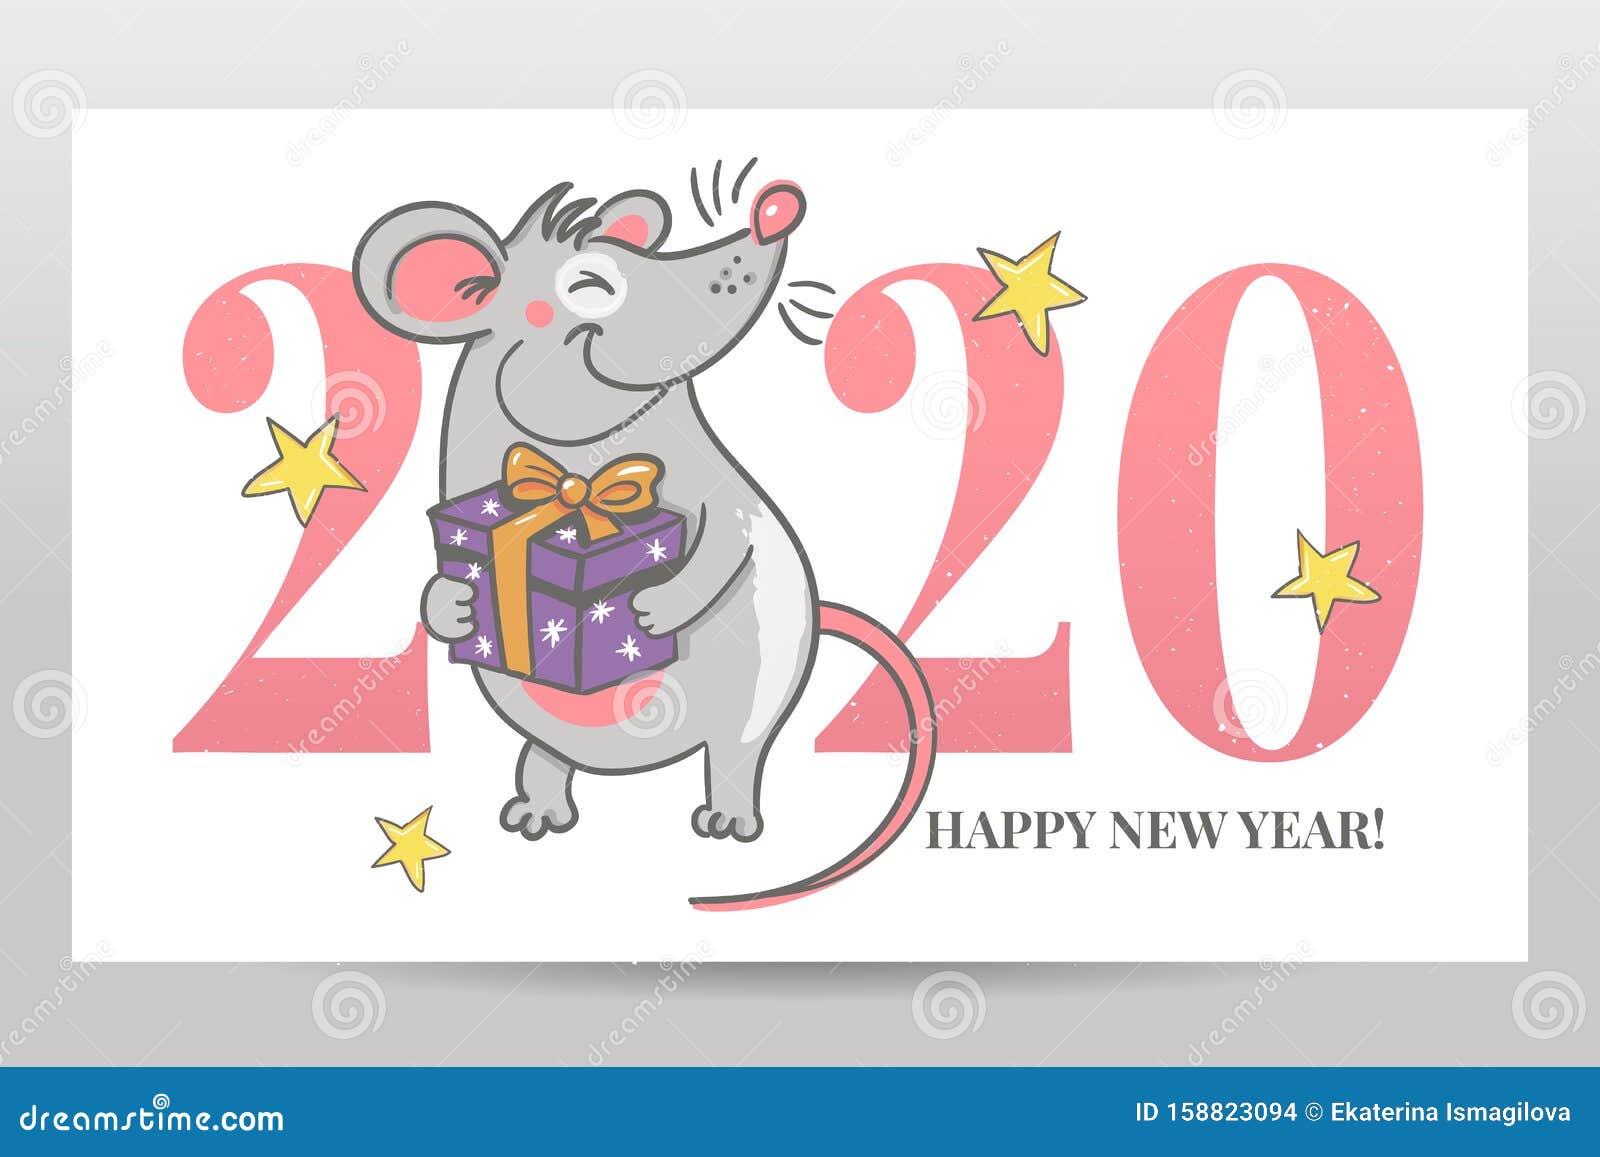 Template Image Happy New Year Party with Rat, White Background New ...